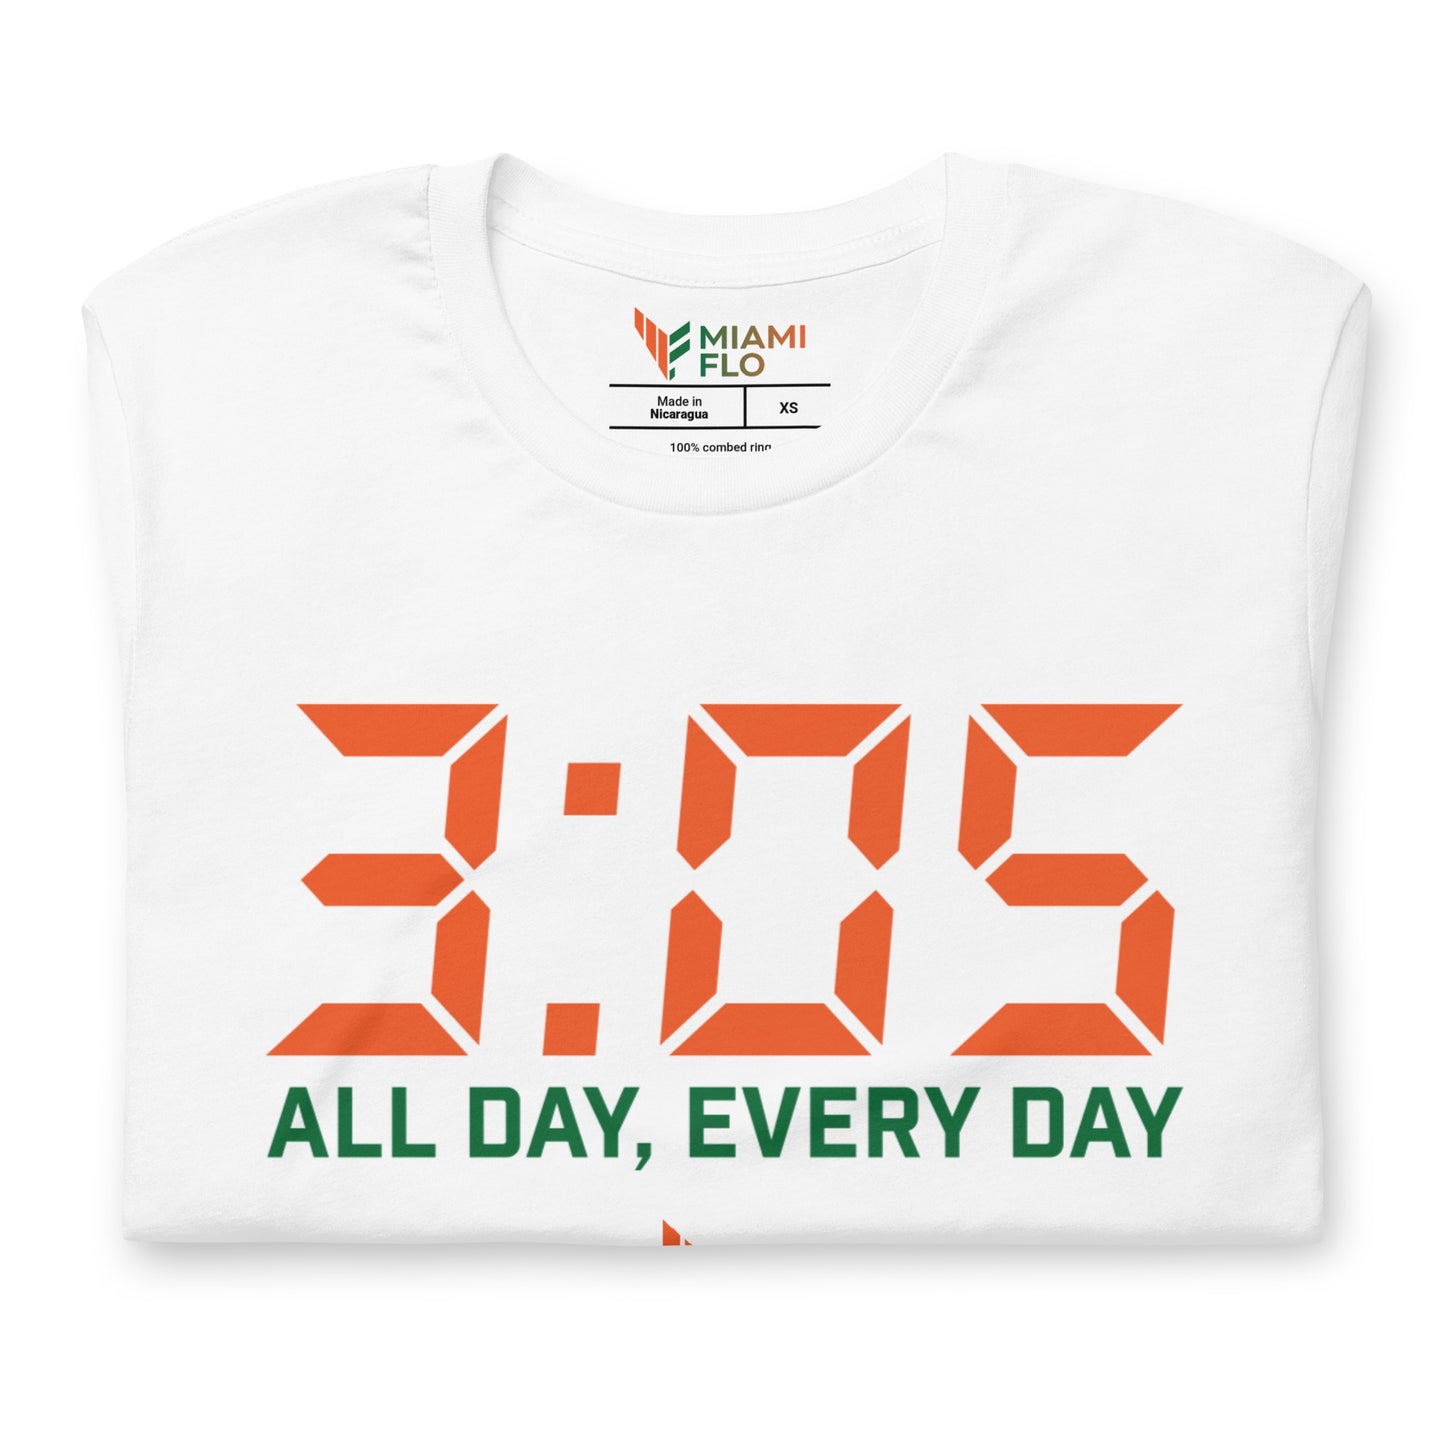 3:05 All Day, Every Day Shirt - Designed By Jas